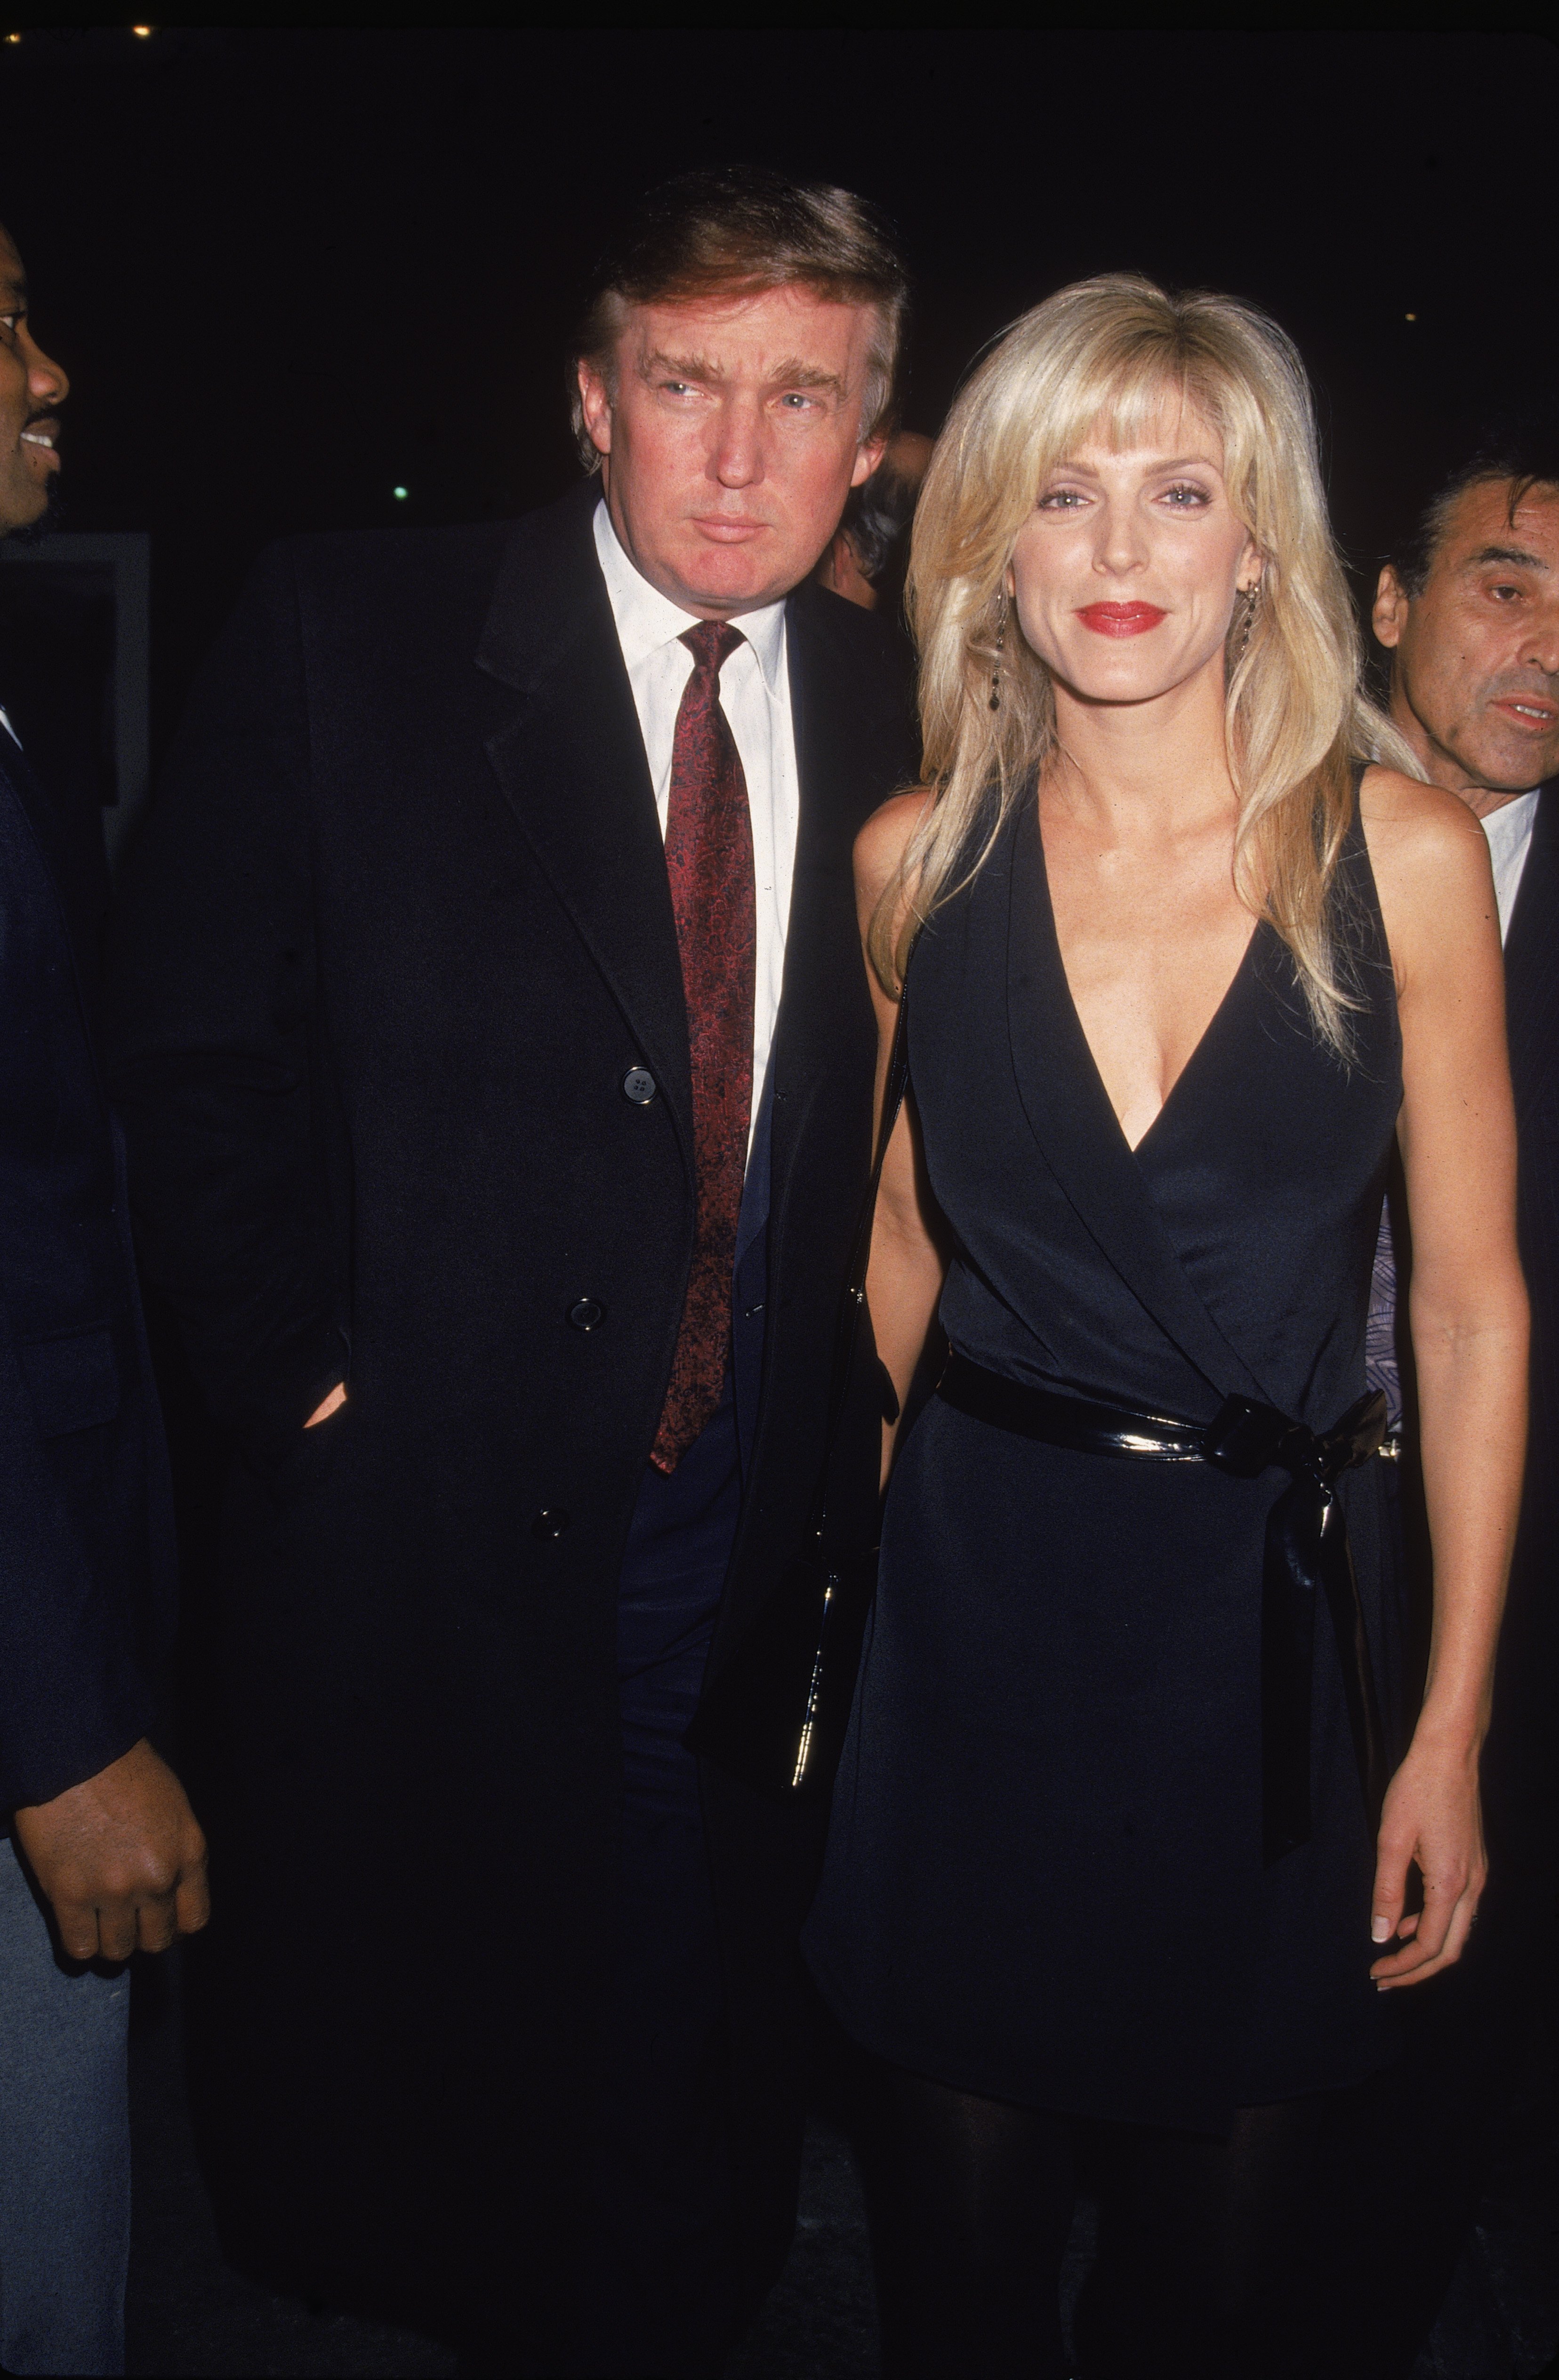 Marla Maples' Engagement Ring from Trump Sold at Auction for $300,000